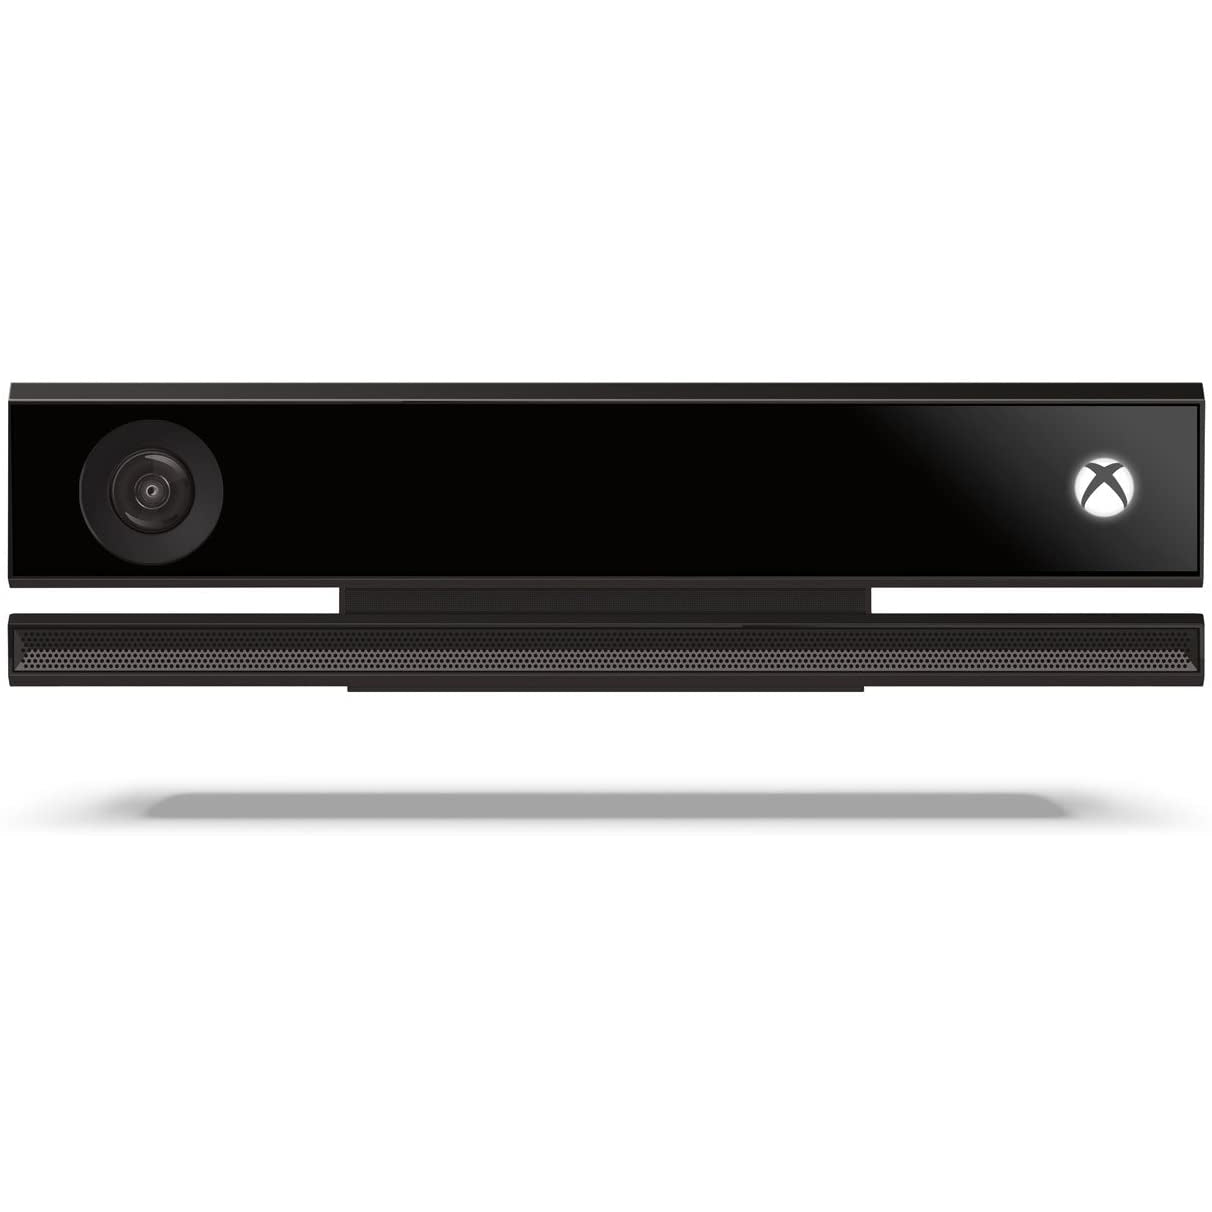 Official Xbox One Kinect Sensor